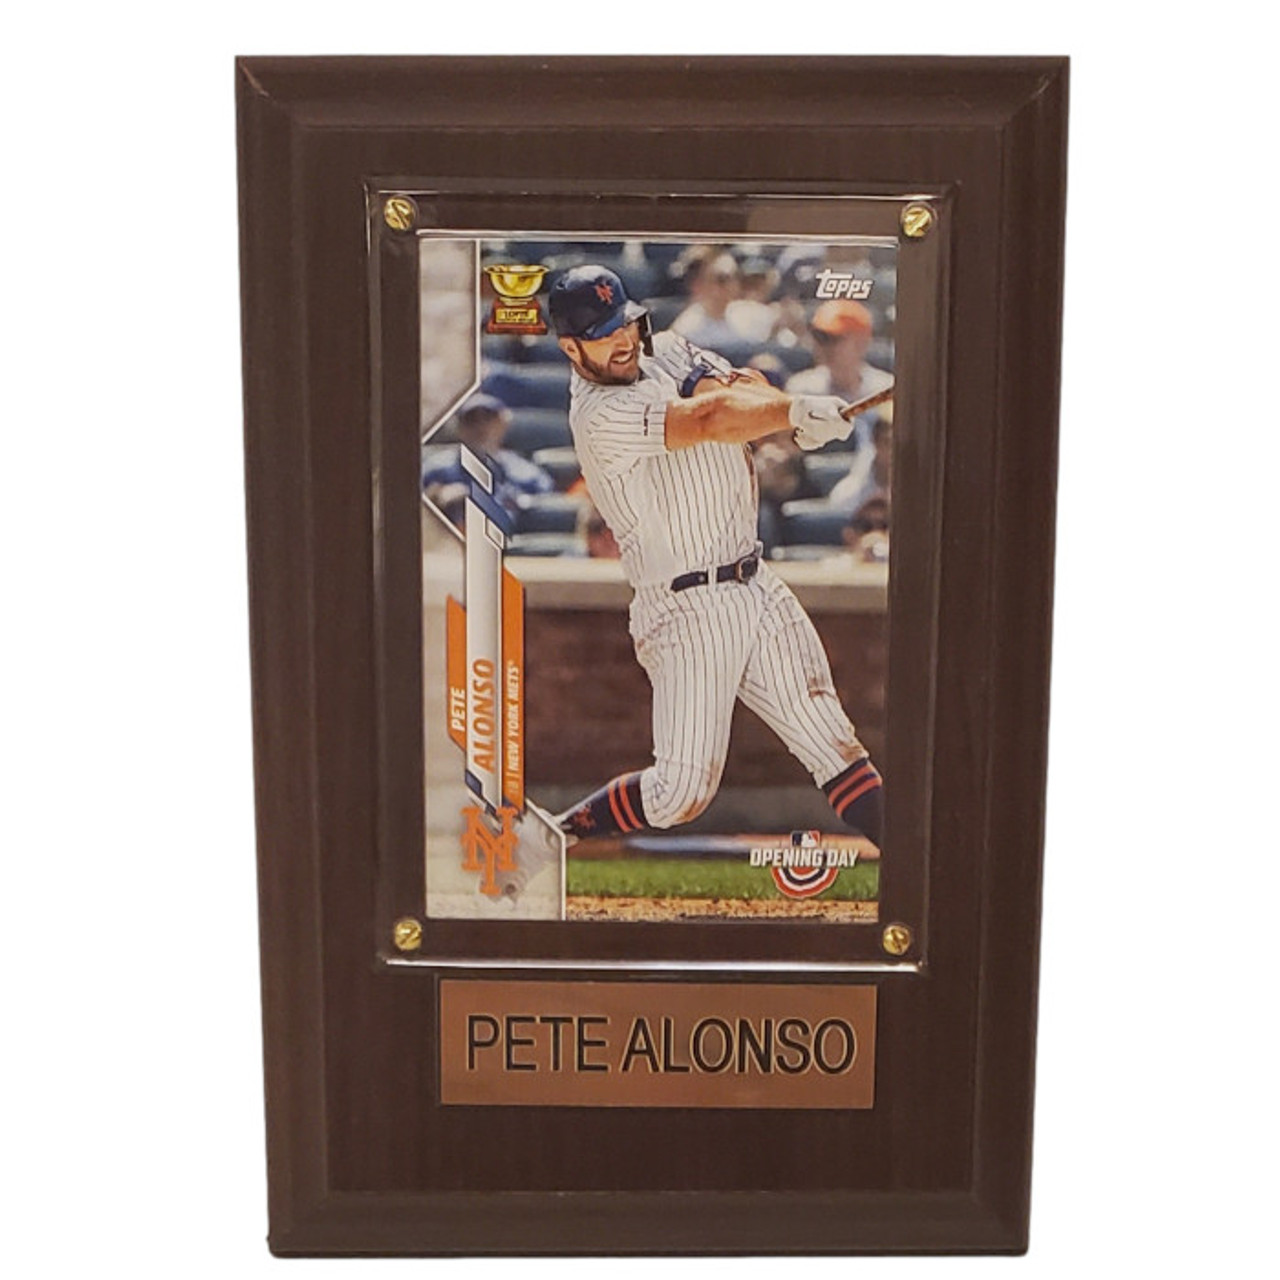 Derby King” (Pete Alonso) New York Mets - 1/1 Original on Wood